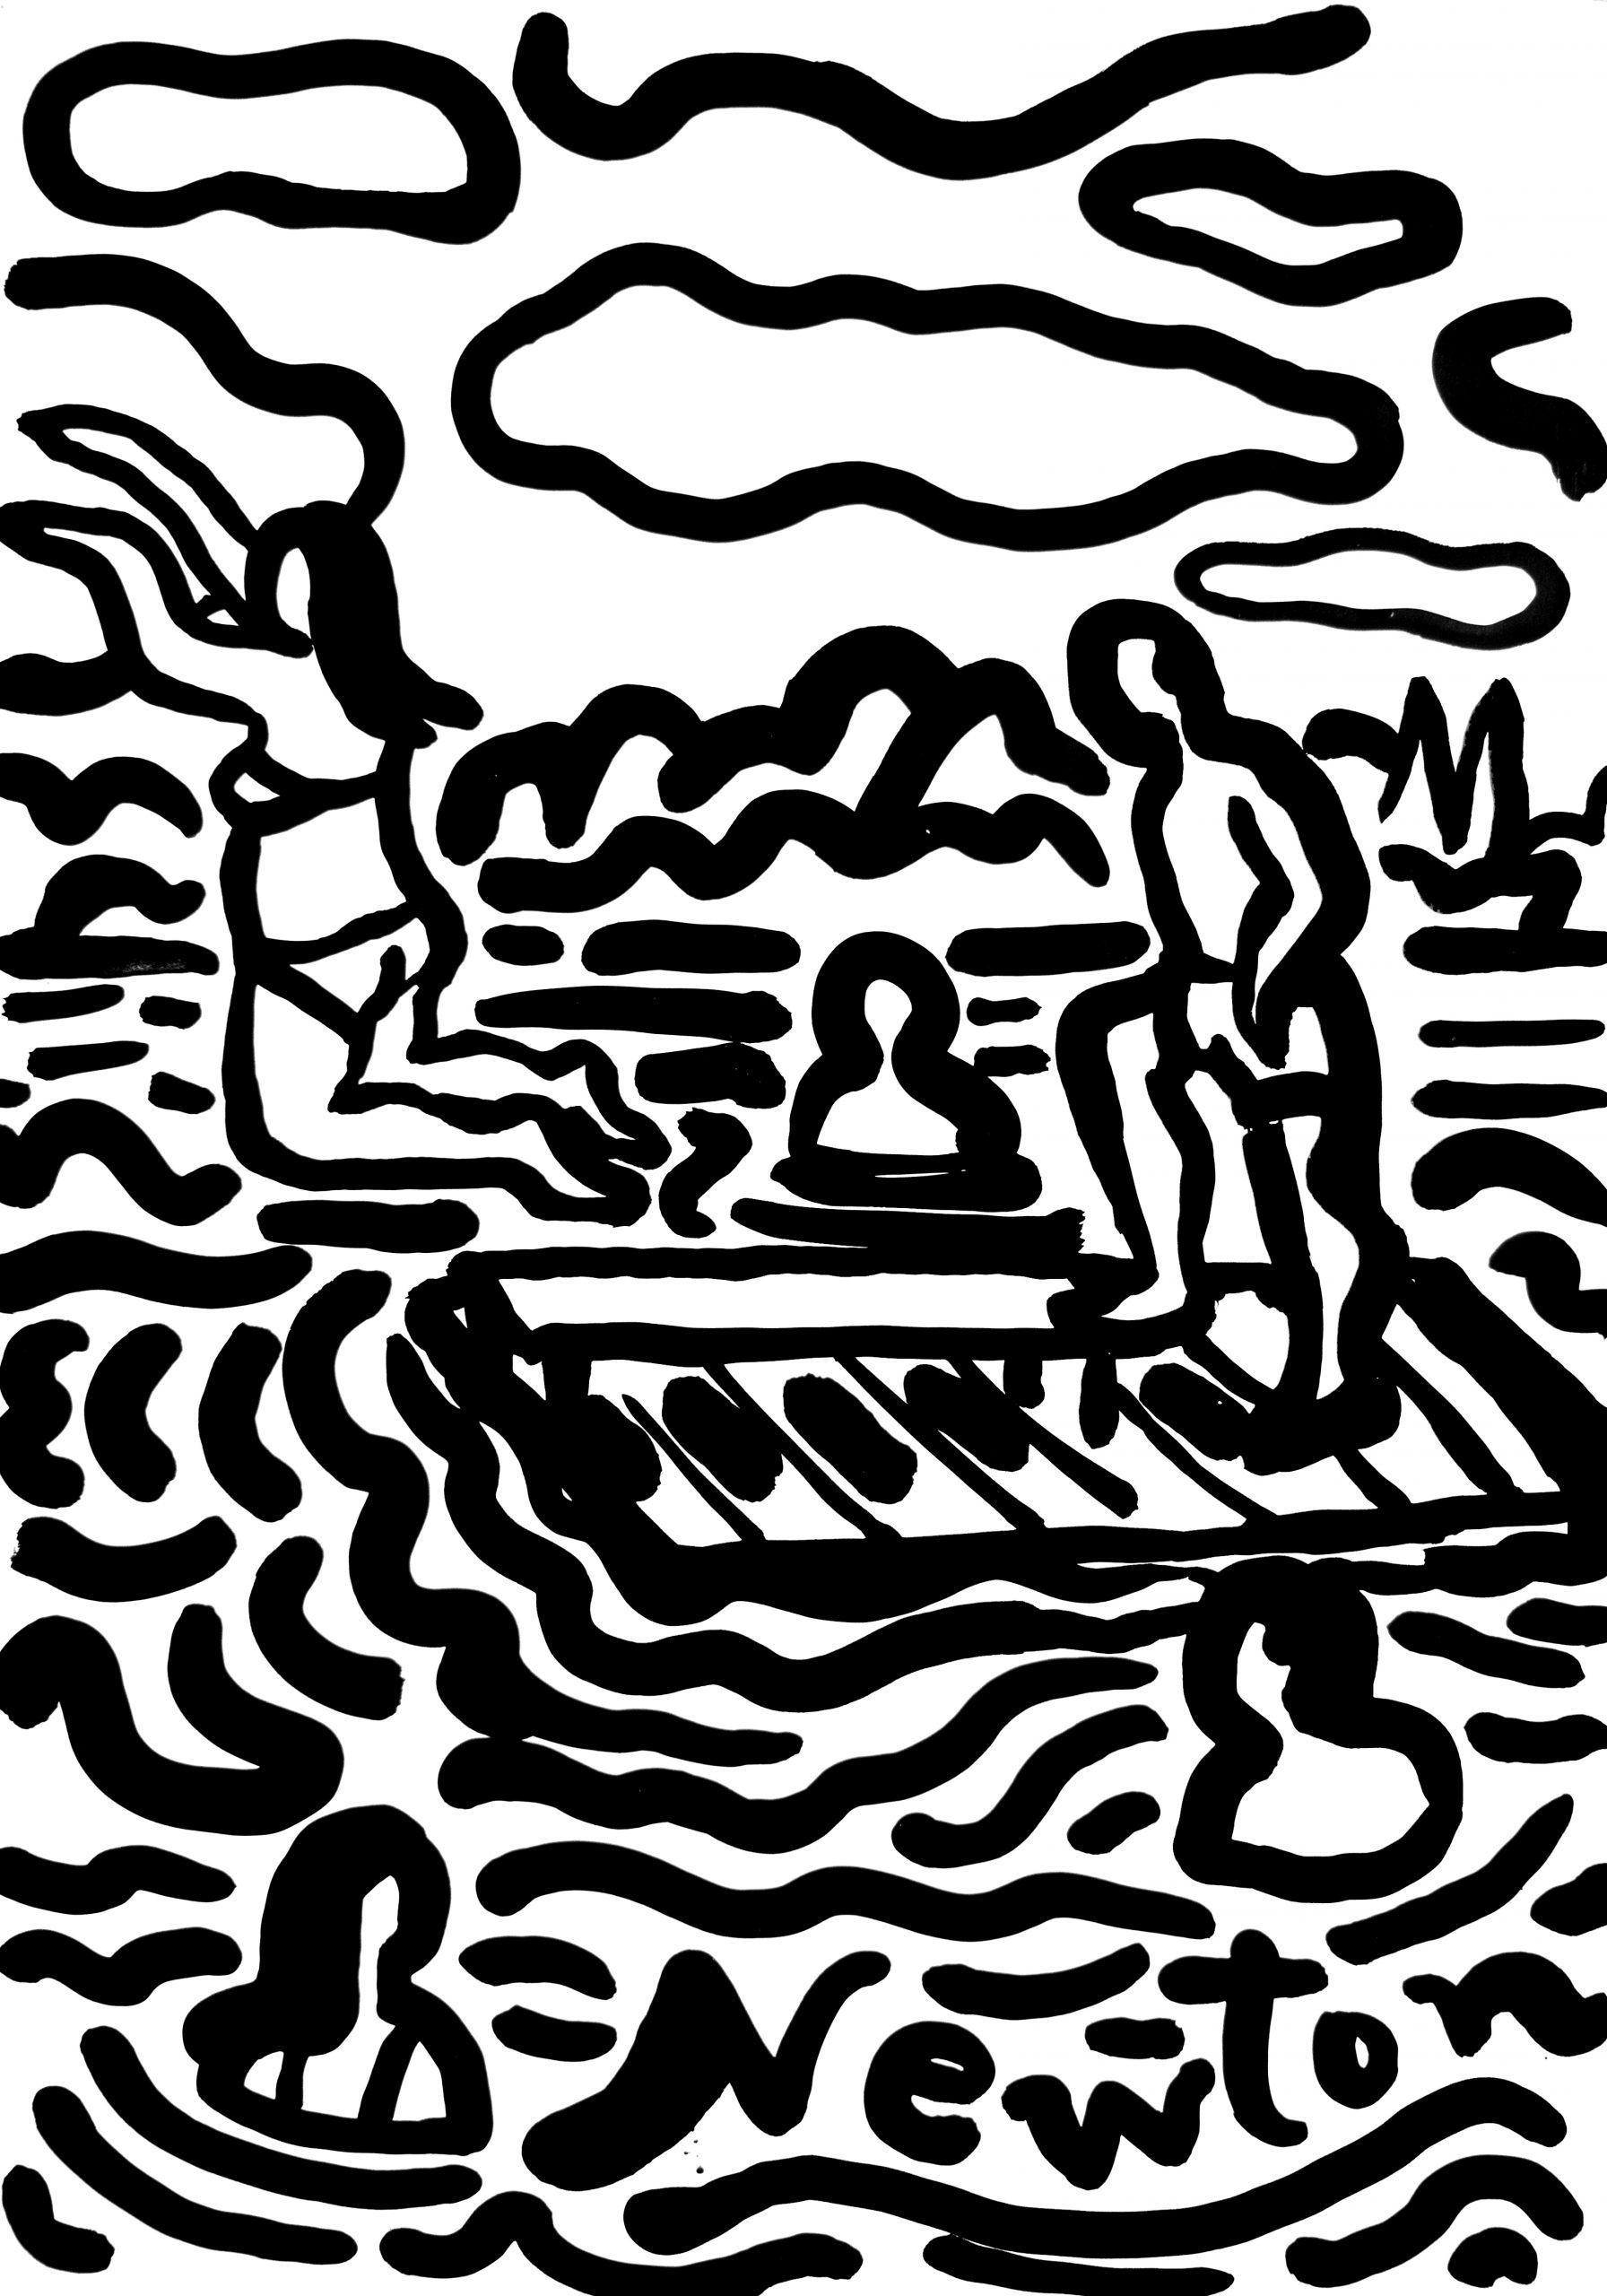 Raft and Swimmers Ink on Paper